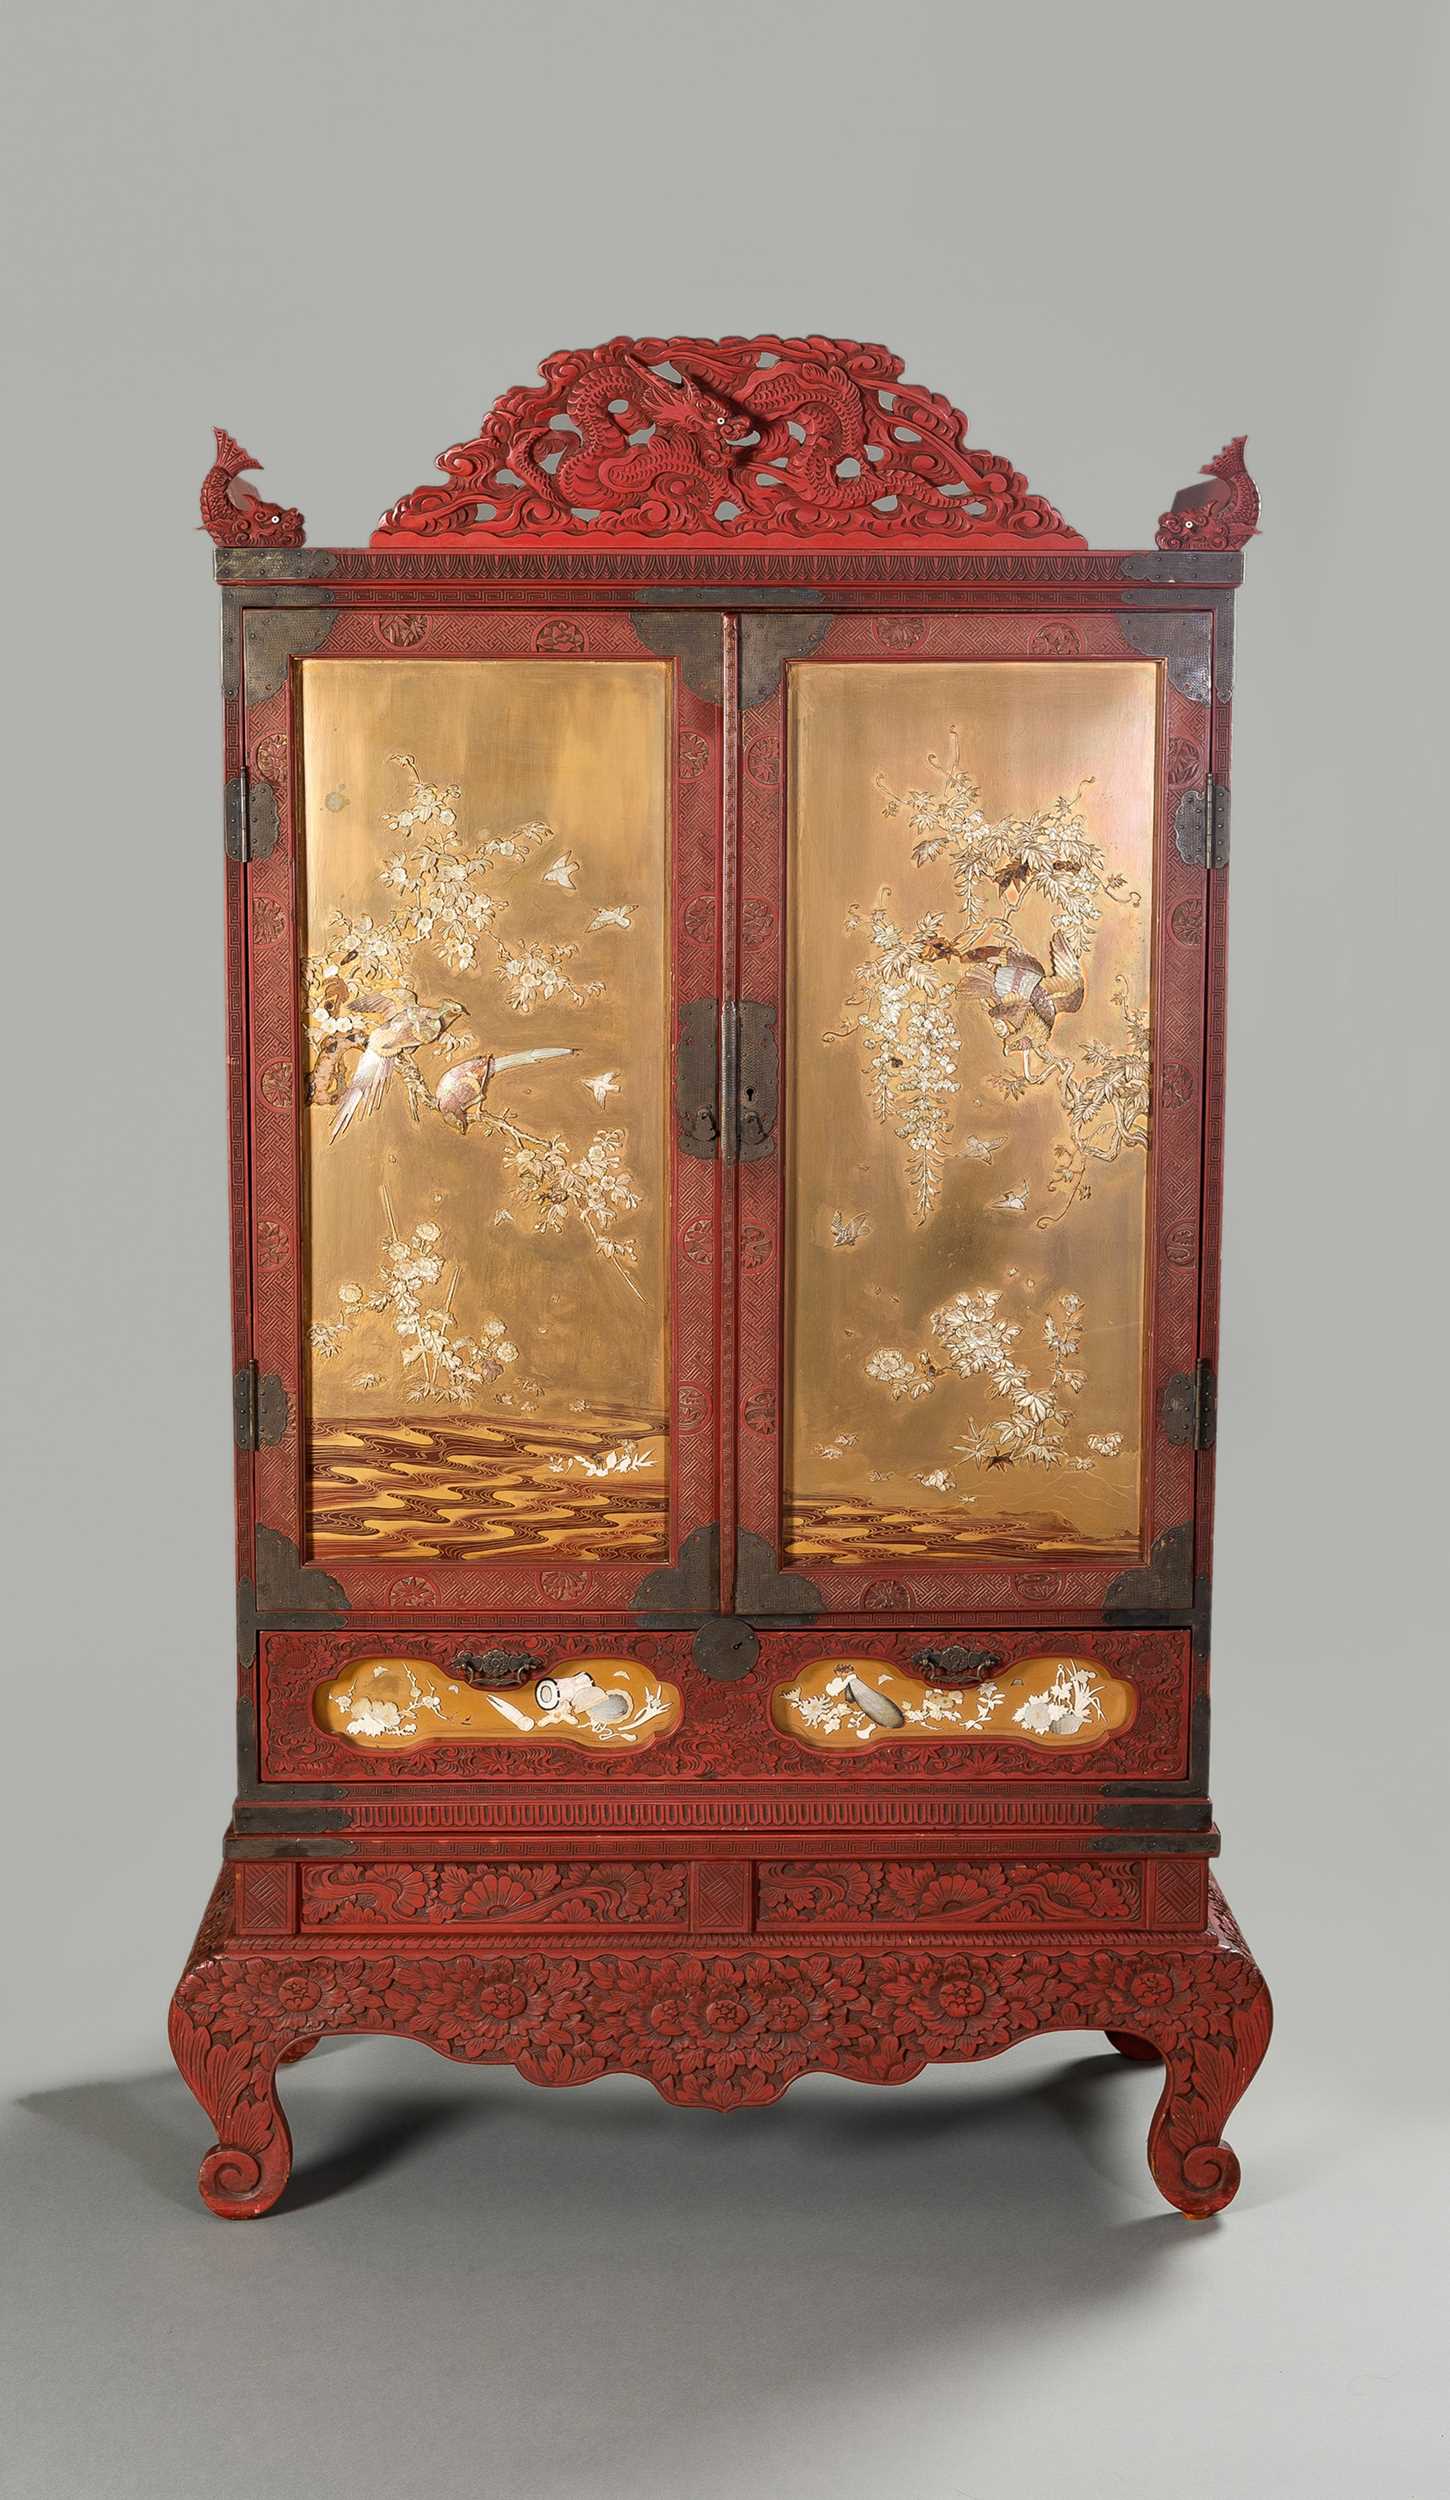 Lot 222 - A LARGE AND IMPRESSIVE LACQUER AND SHIBAYAMA CABINET